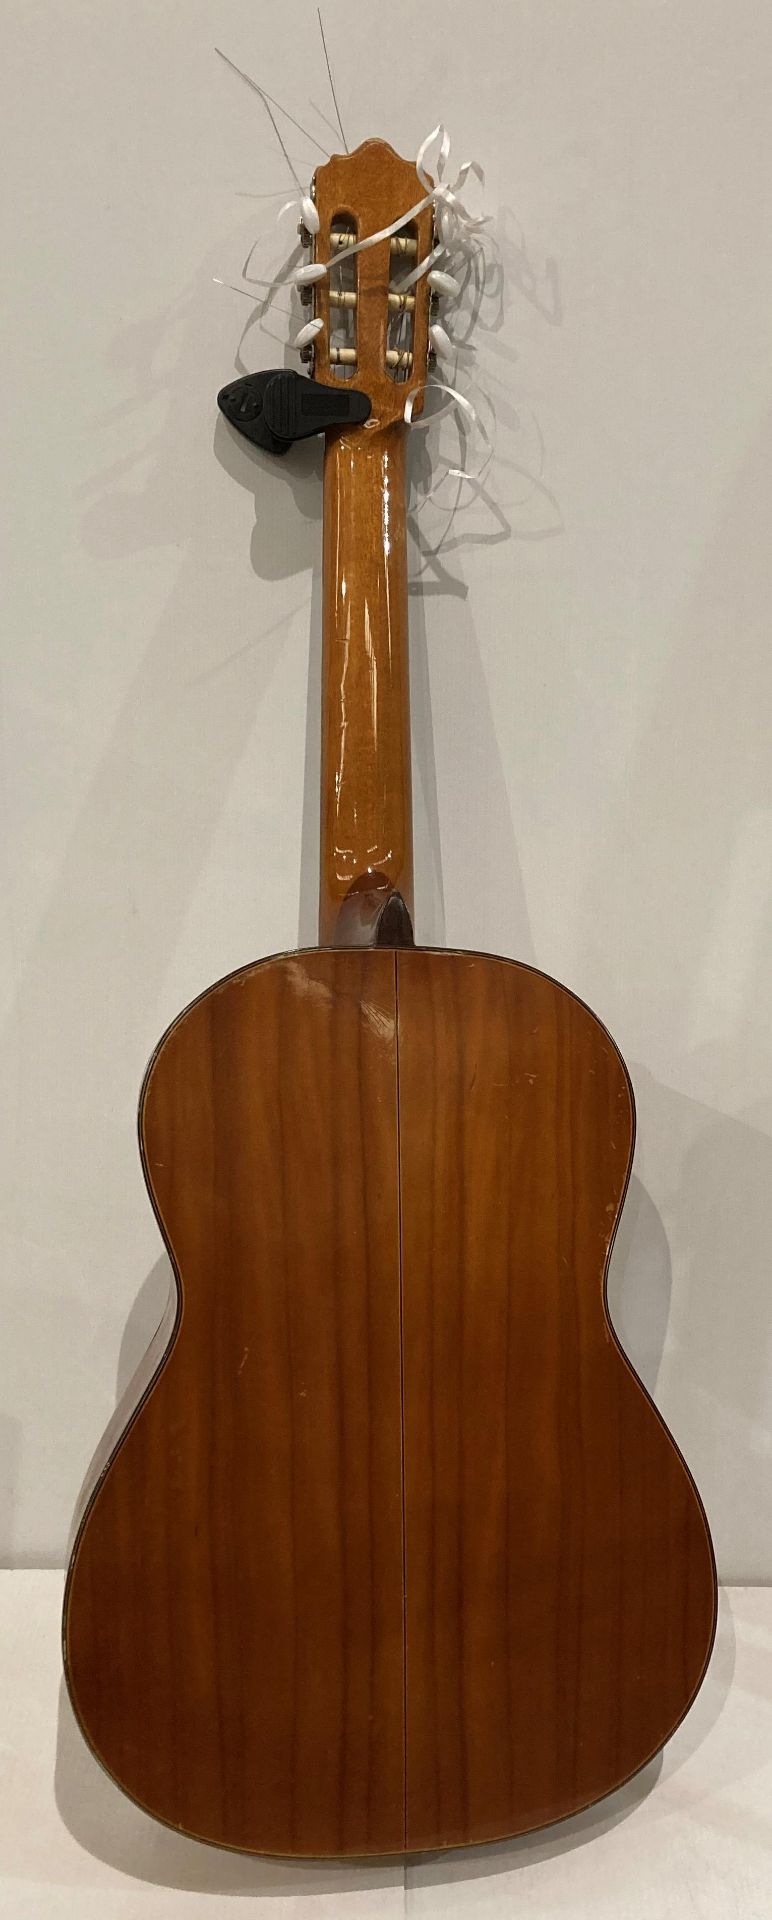 Angelica 2857 acoustic guitar and an Eno ET-3000+ auto tuner (clip on) (Saleroom location: S3) - Image 2 of 4